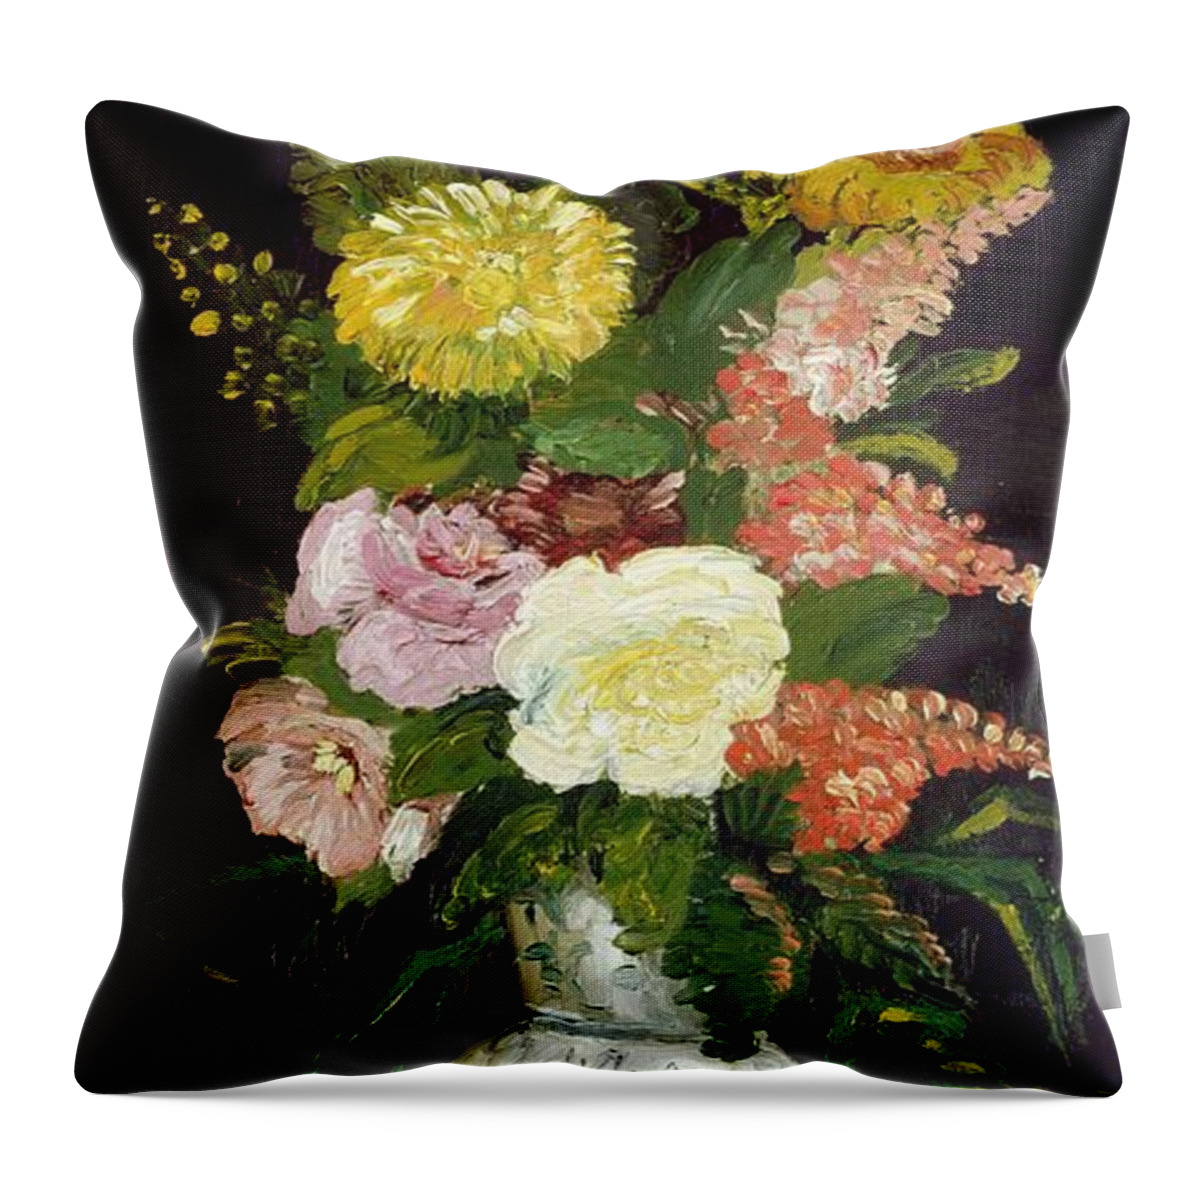 Van Gogh Throw Pillow featuring the painting Vase Of Flowers, 1886 by Vincent van Gogh